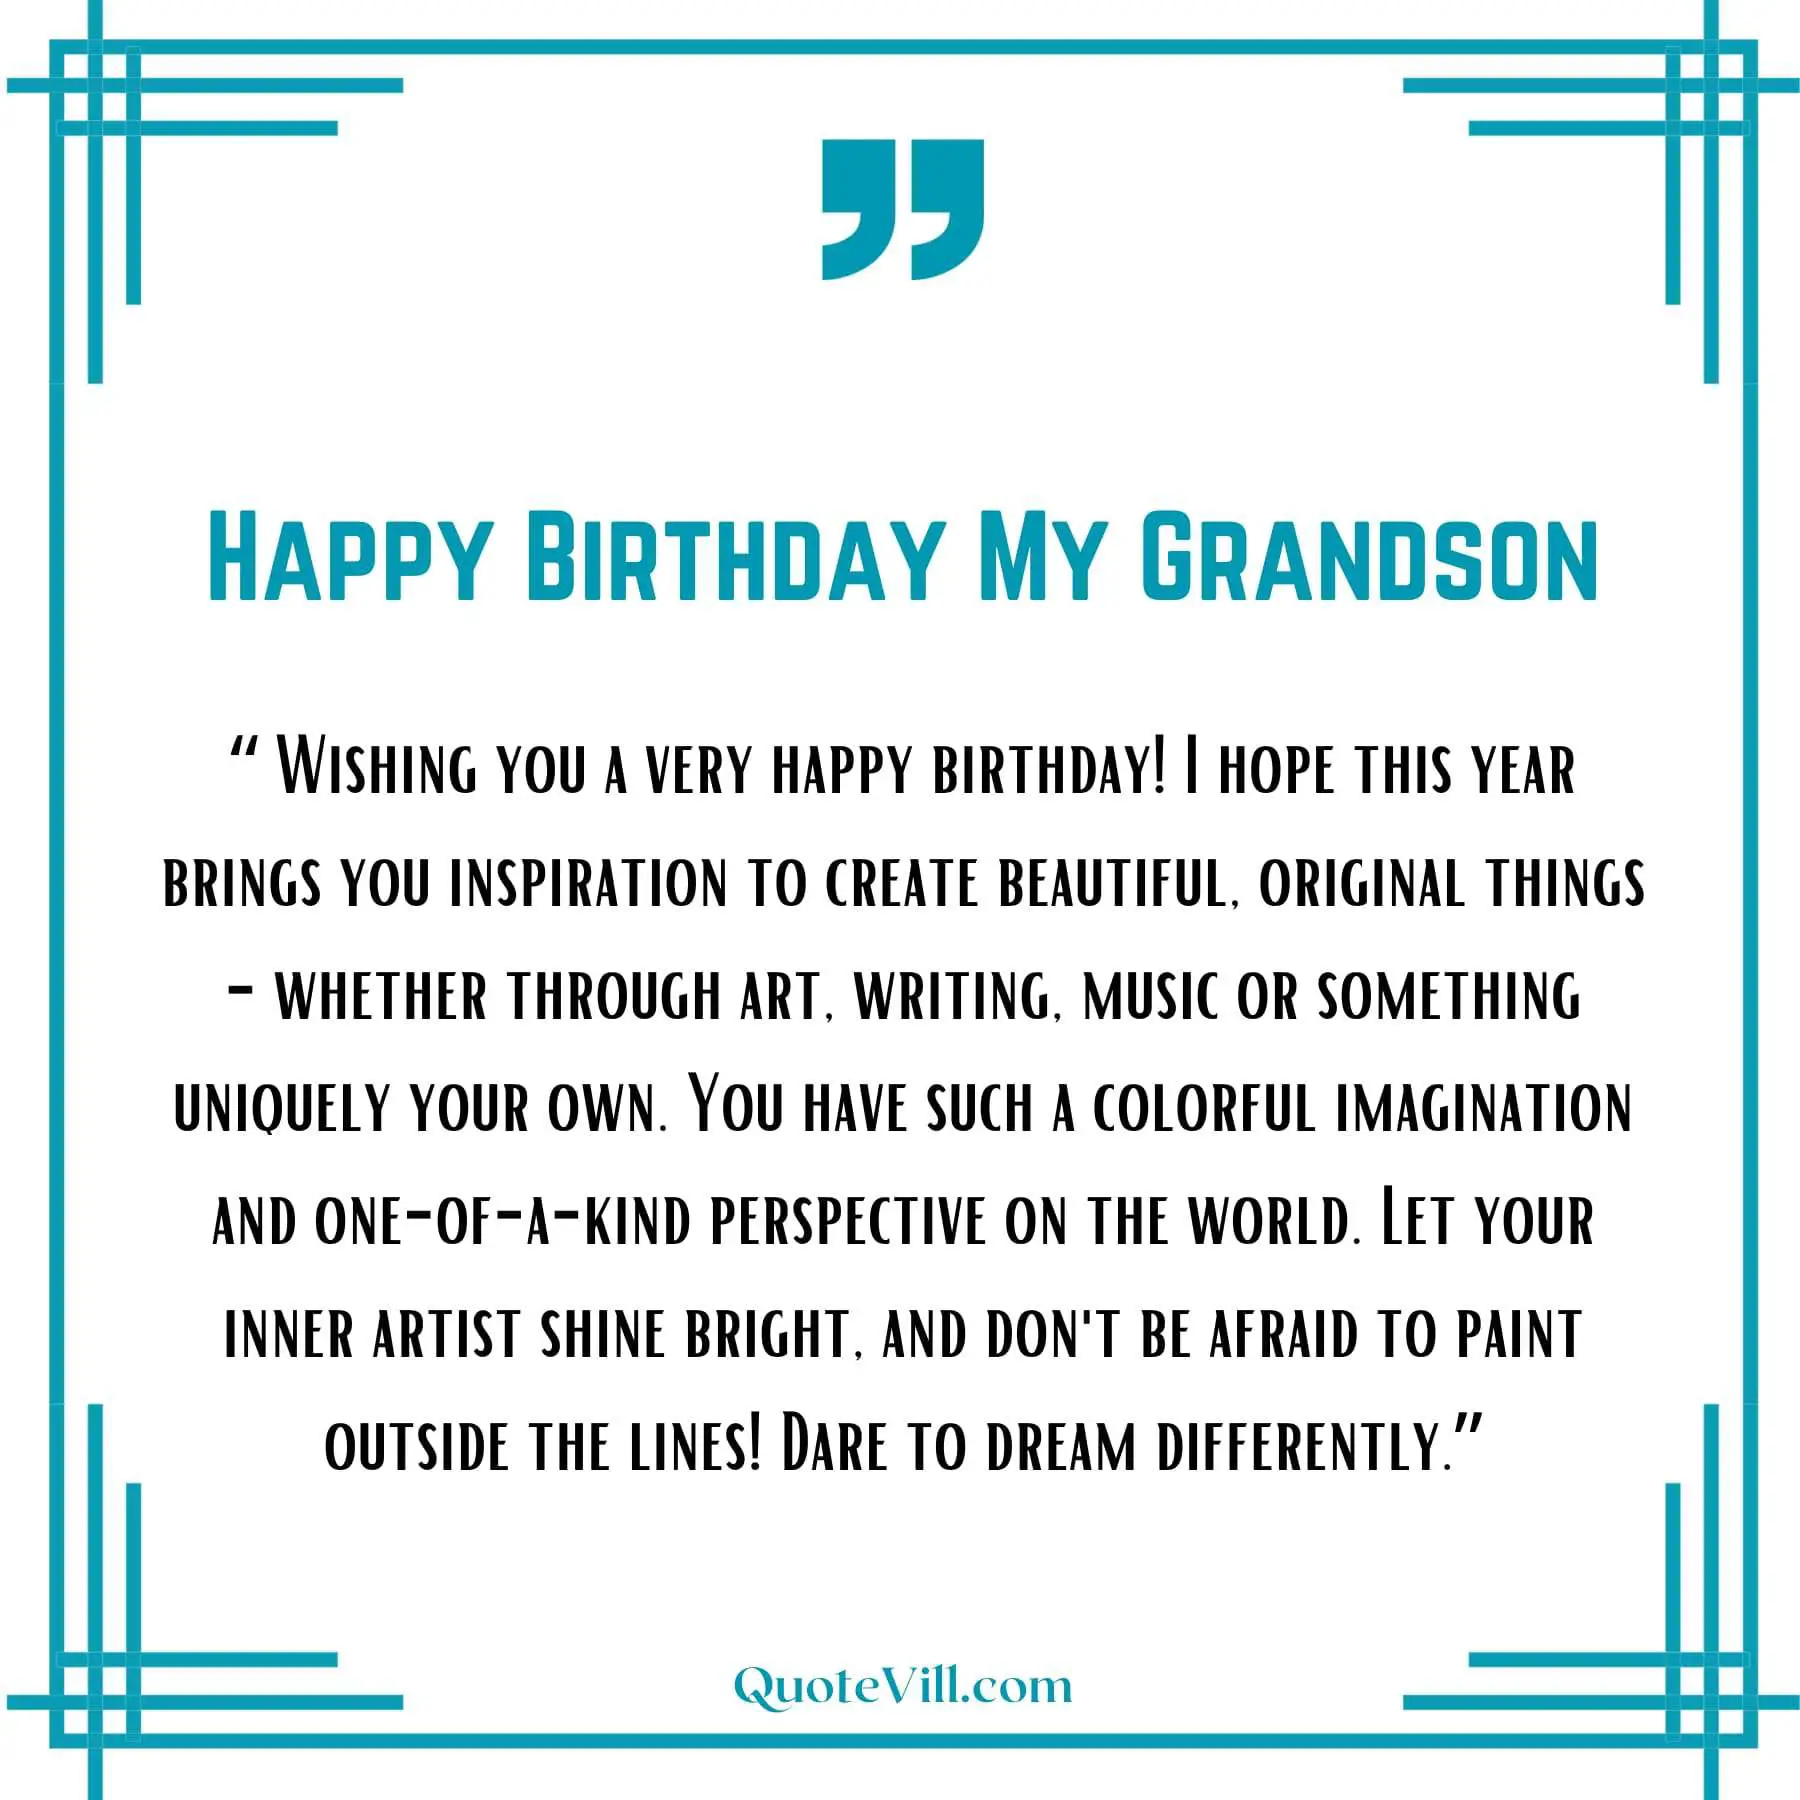 Top-10-Happy-Birthday-Wishes-for-Grandson